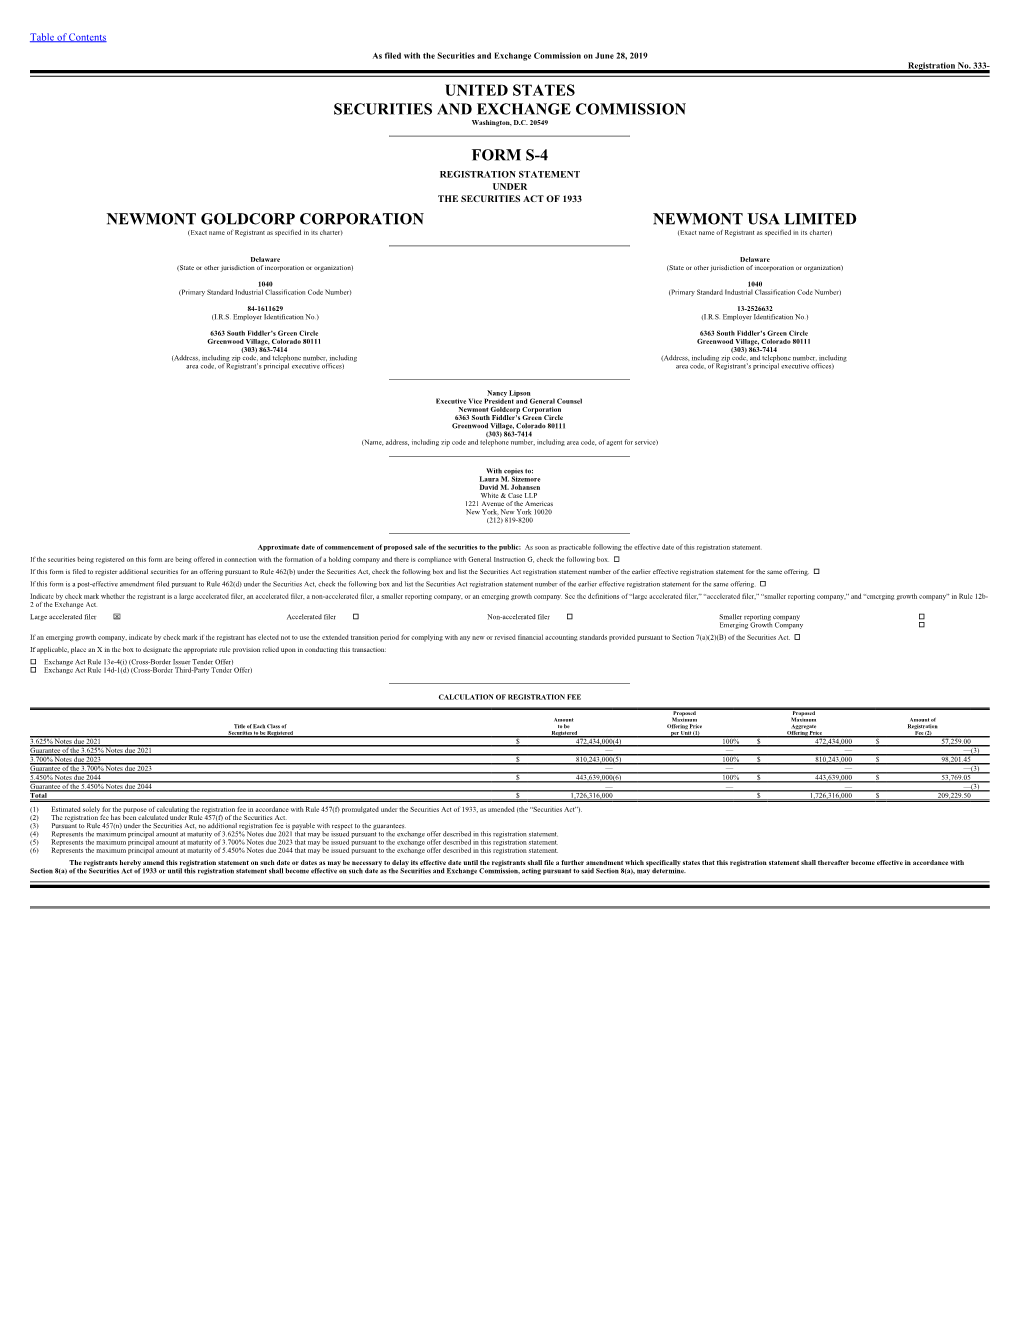 United States Securities and Exchange Commission Form S-4 Newmont Goldcorp Corporation Newmont Usa Limited